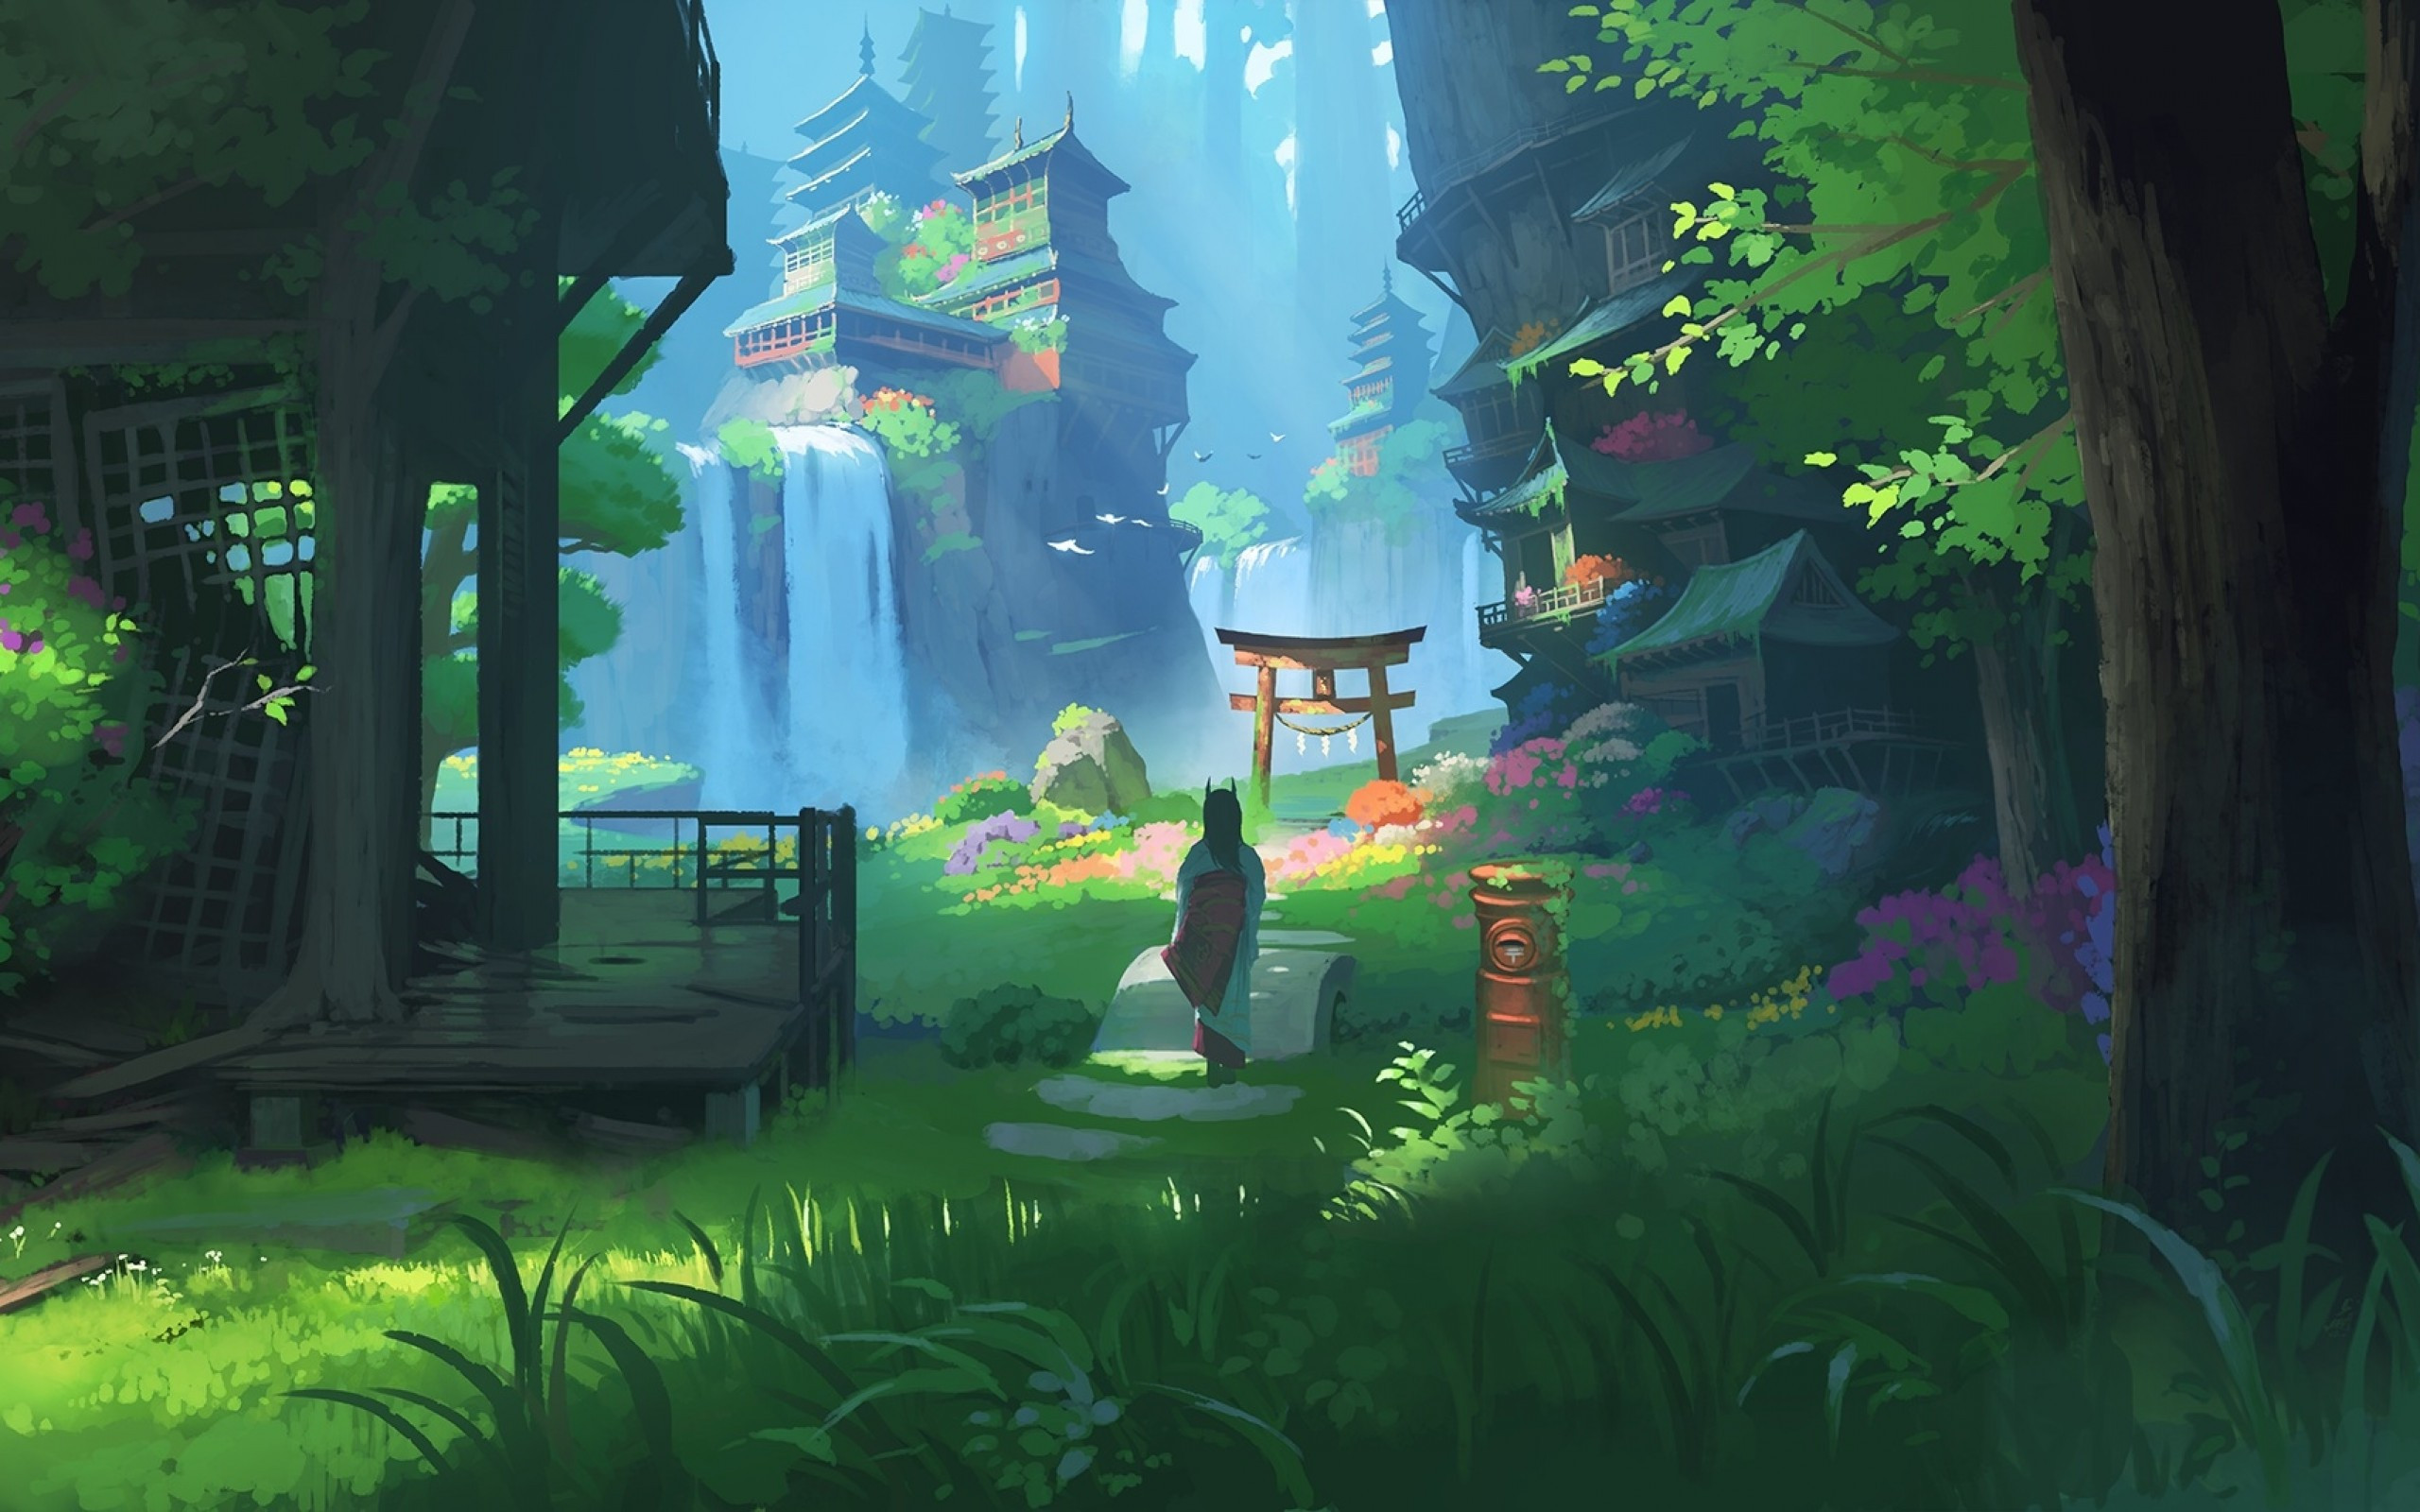 Download 2560x1600 Anime Landscape, Waterfall, Fantasy, Asian Buildings, Japanese Clothes, Horns Wallpaper for MacBook Pro 13 inch